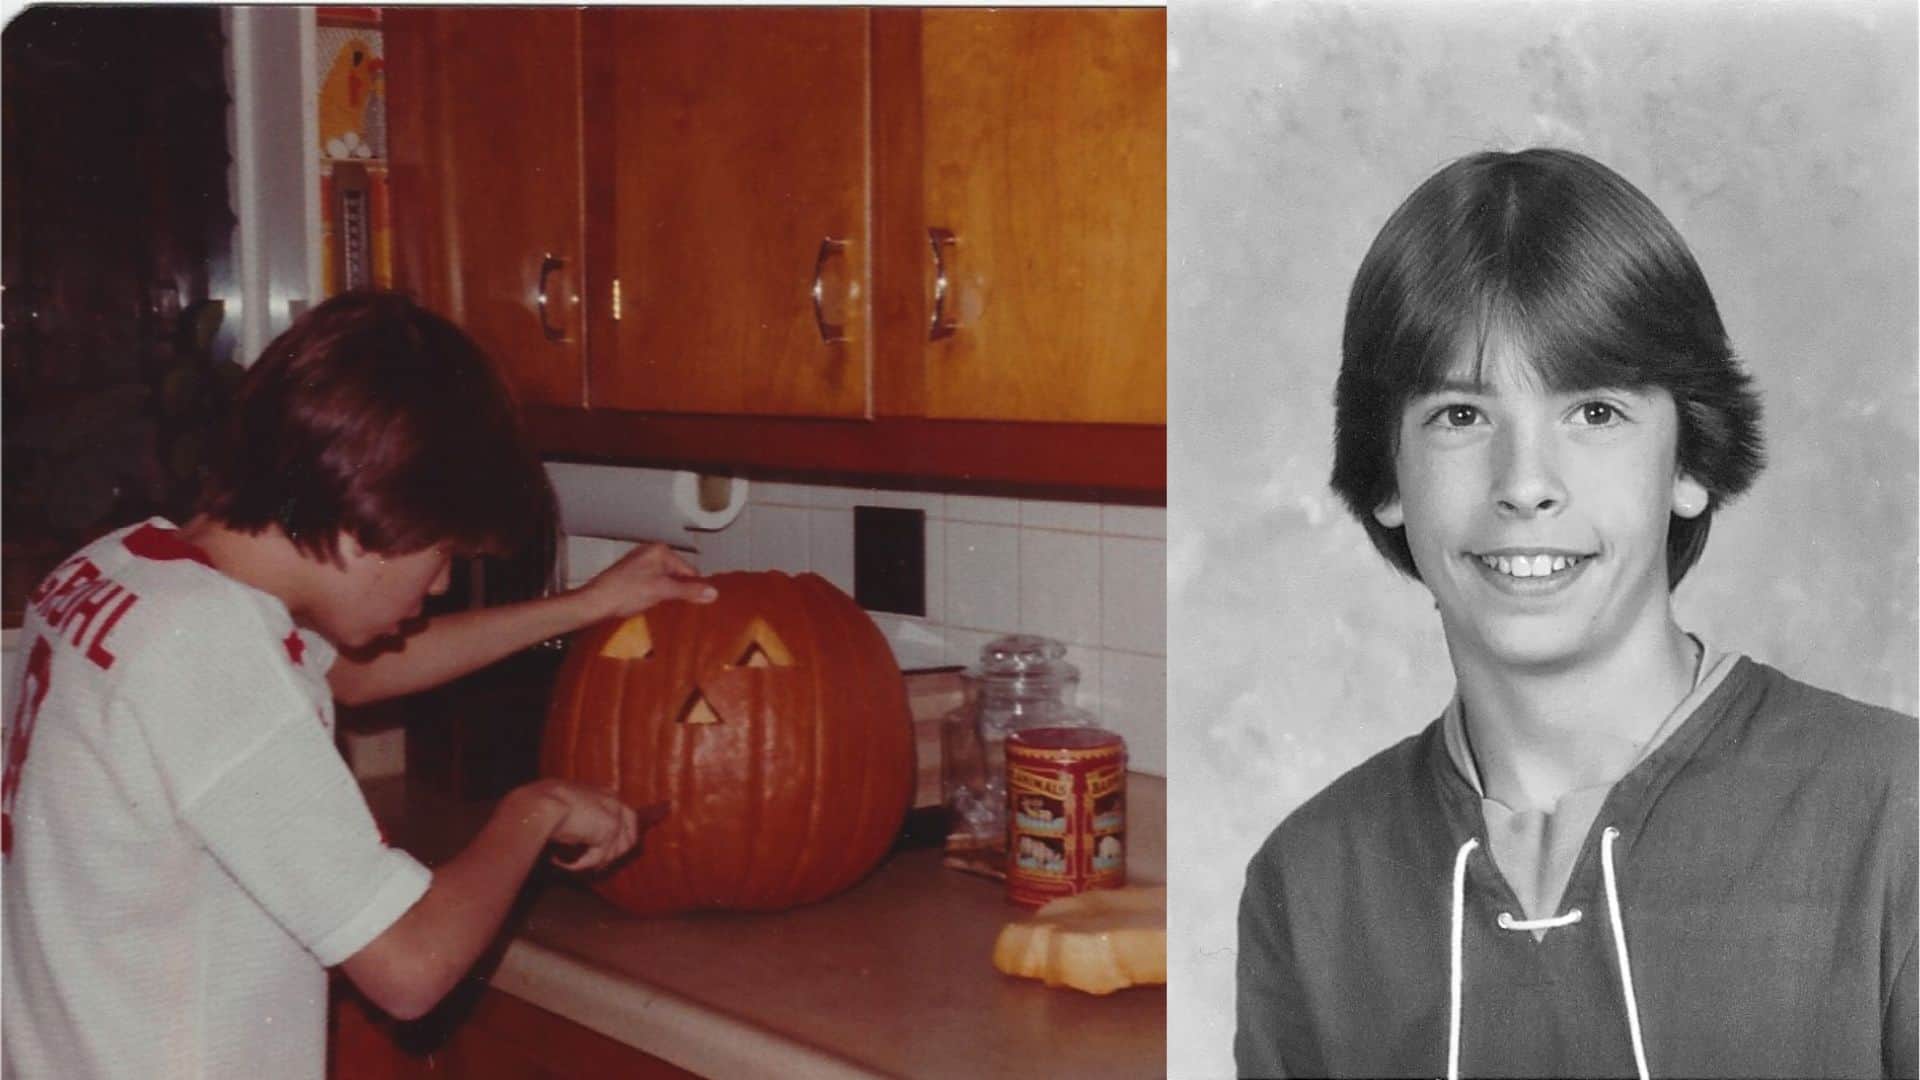 Childhood pictures of Dave Grohl